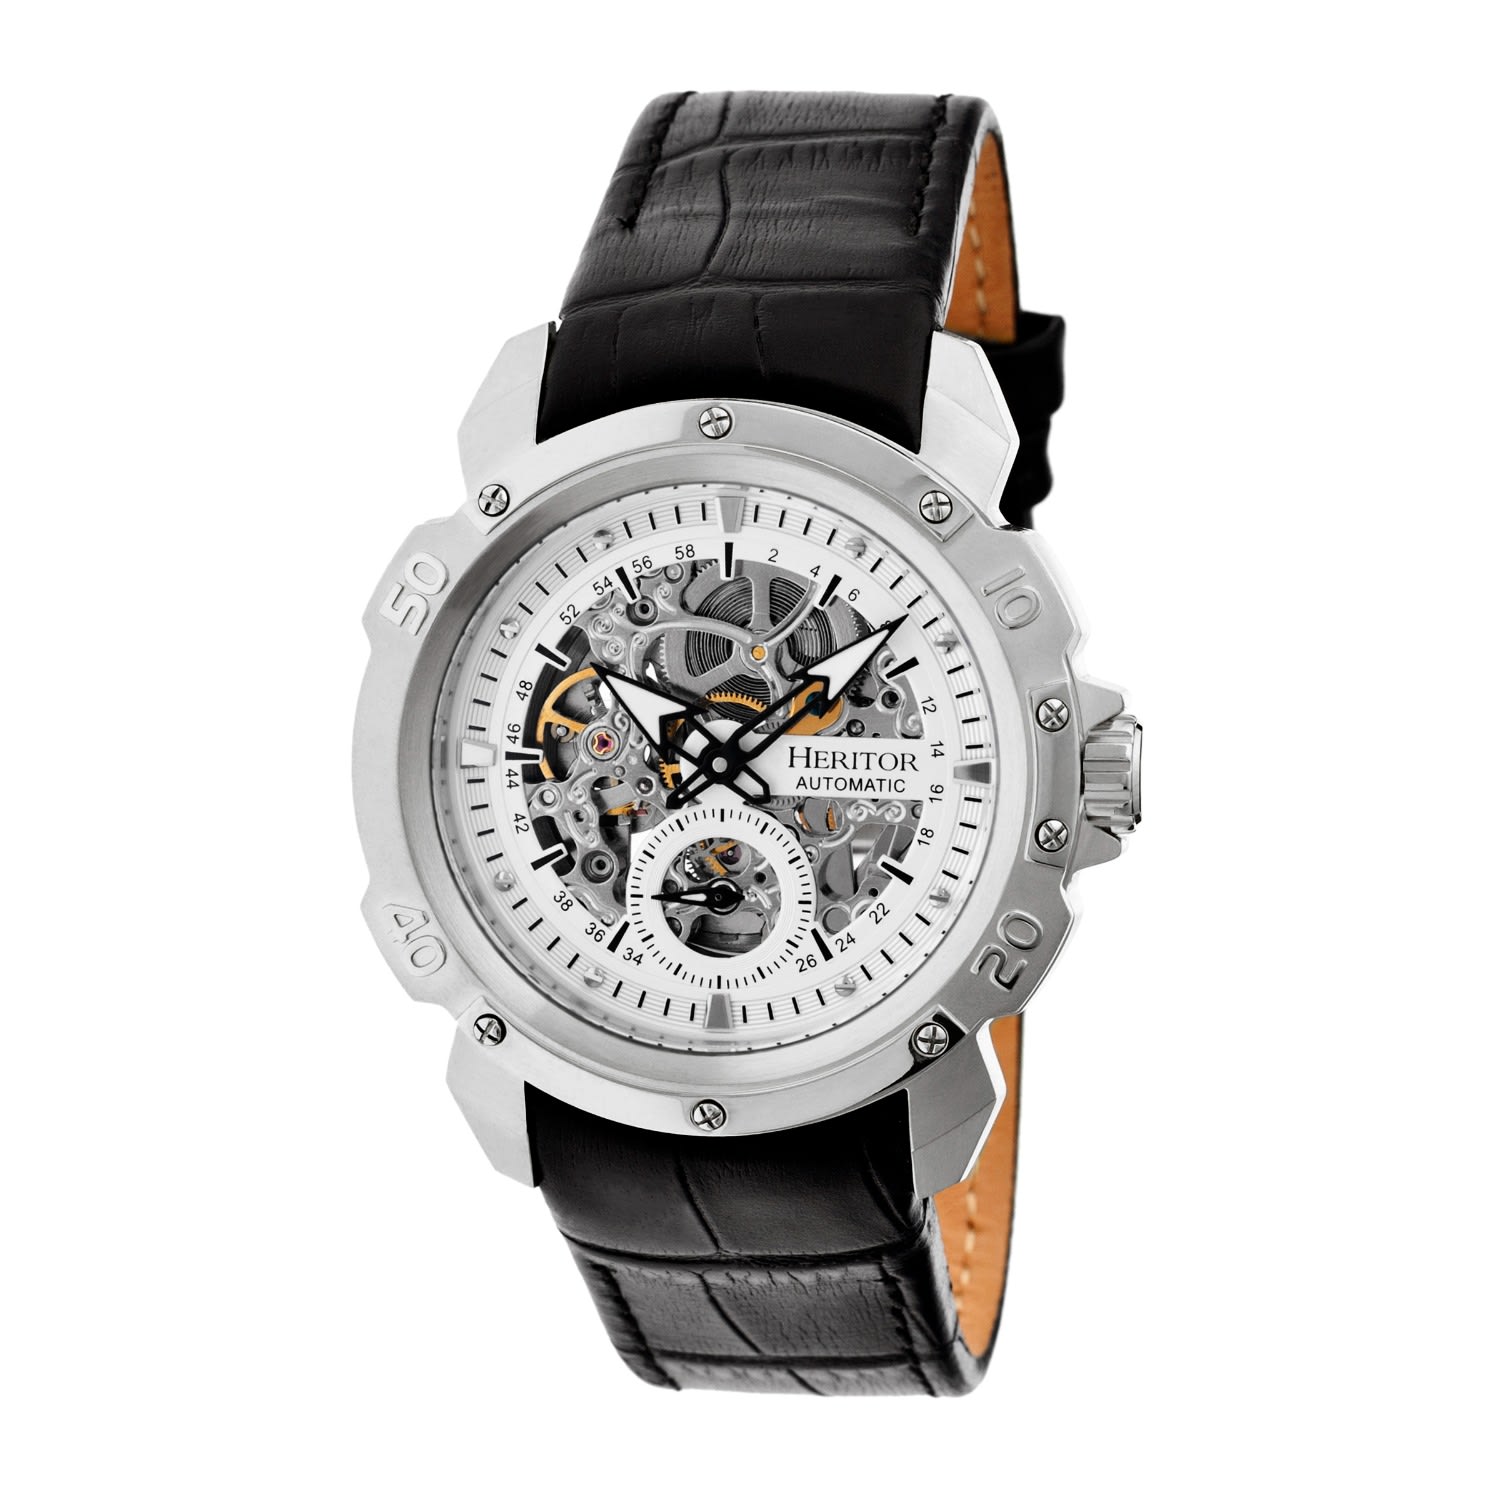 Heritor Automatic Men's Conrad Leather-band Skeleton Watch With Seconds Sub-dial - Silver